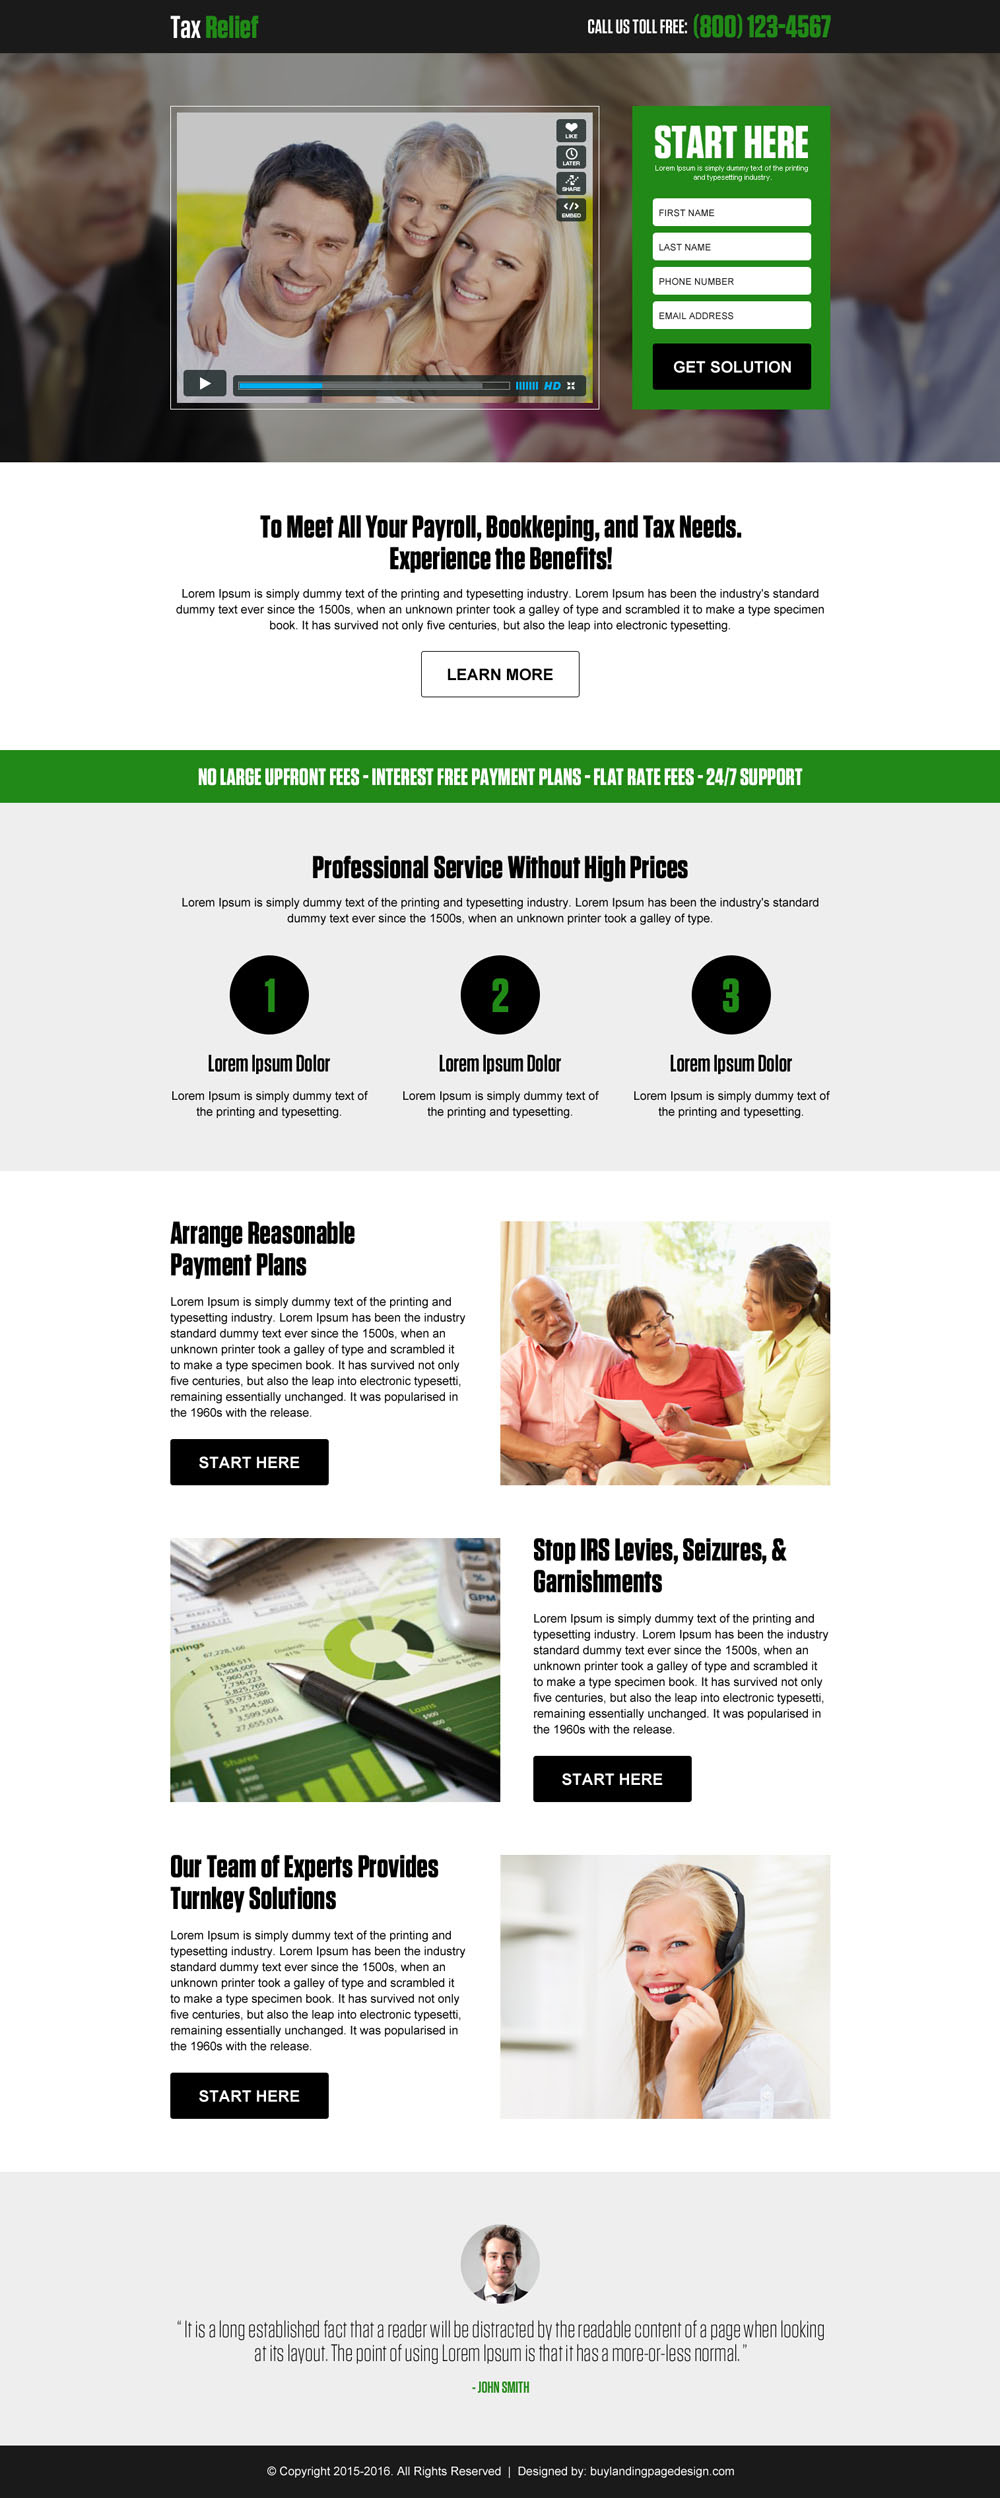 tax-relief-lead-generation-converting-video-landing-page-design-002